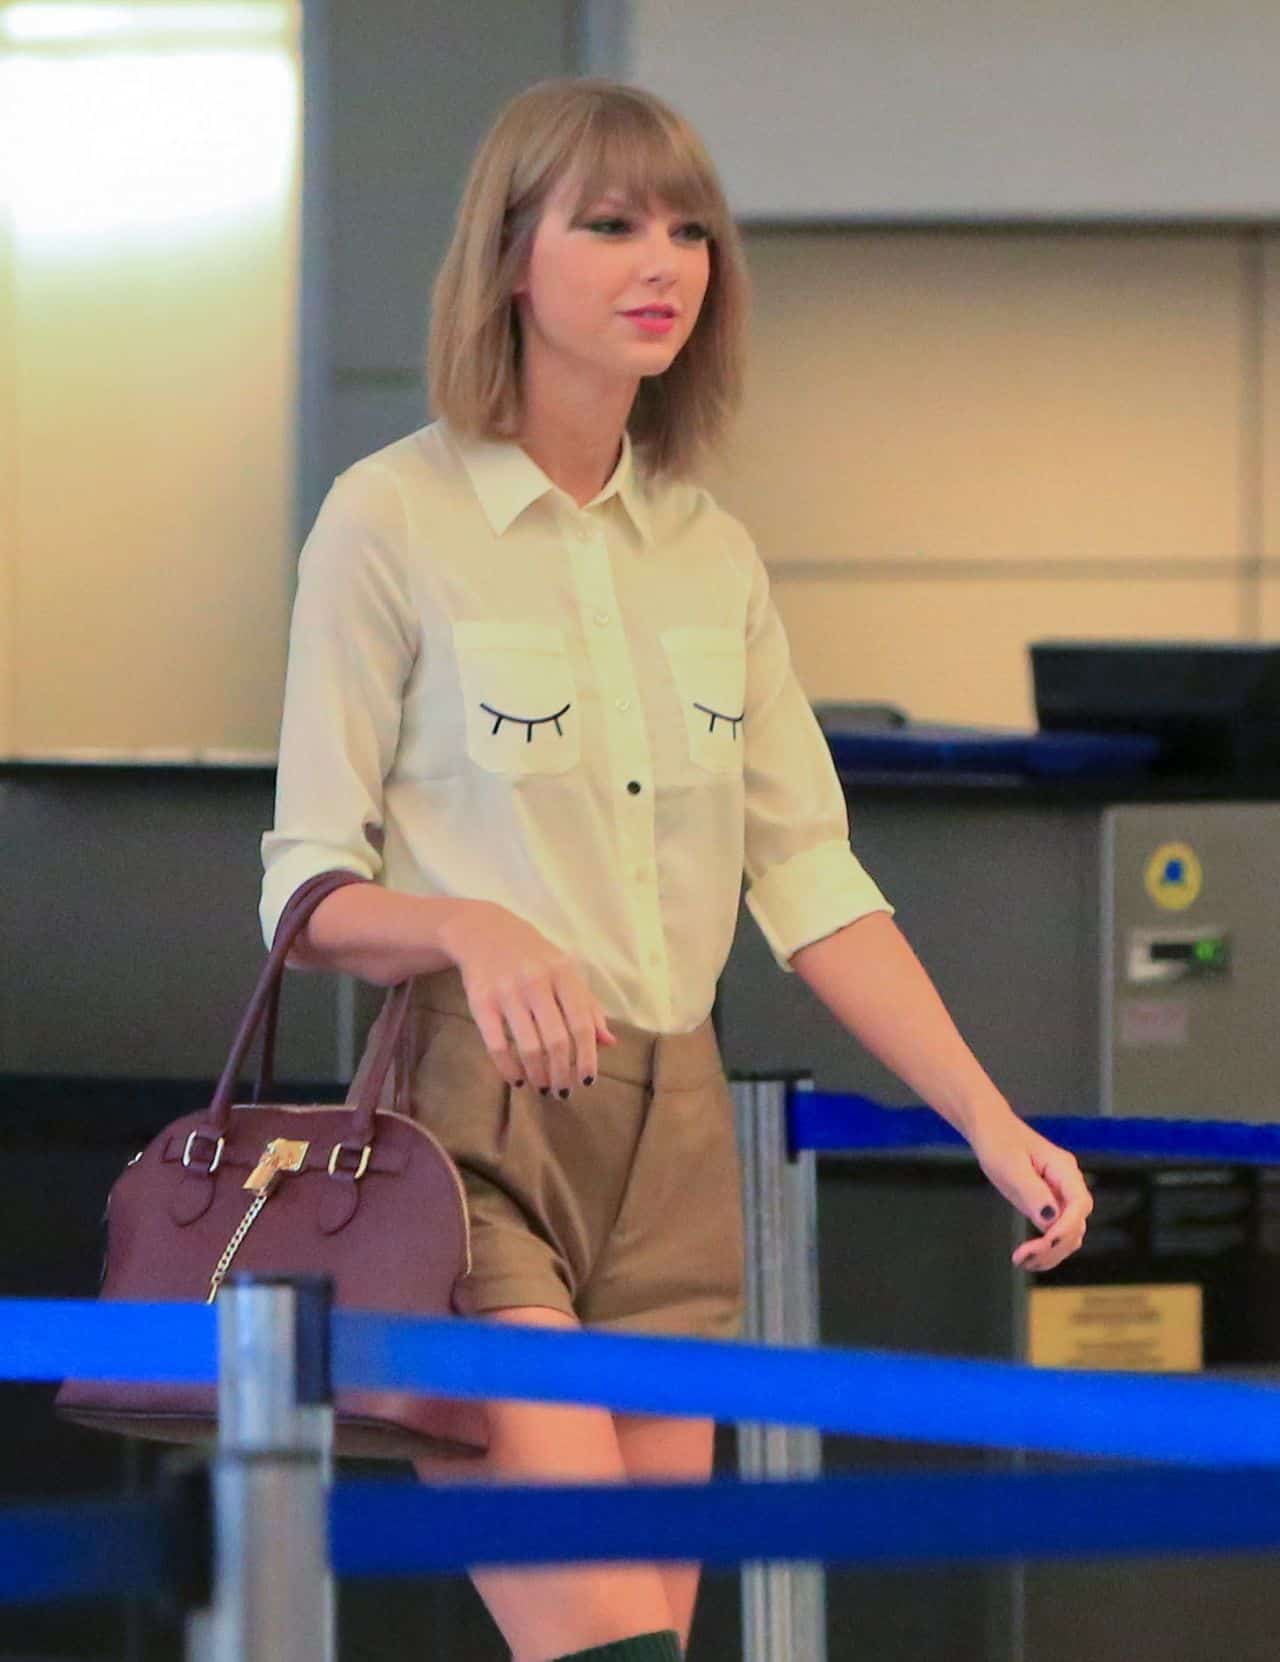 Taylor Swift Wears Brown Shorts and a White Shirt at LAX Airport